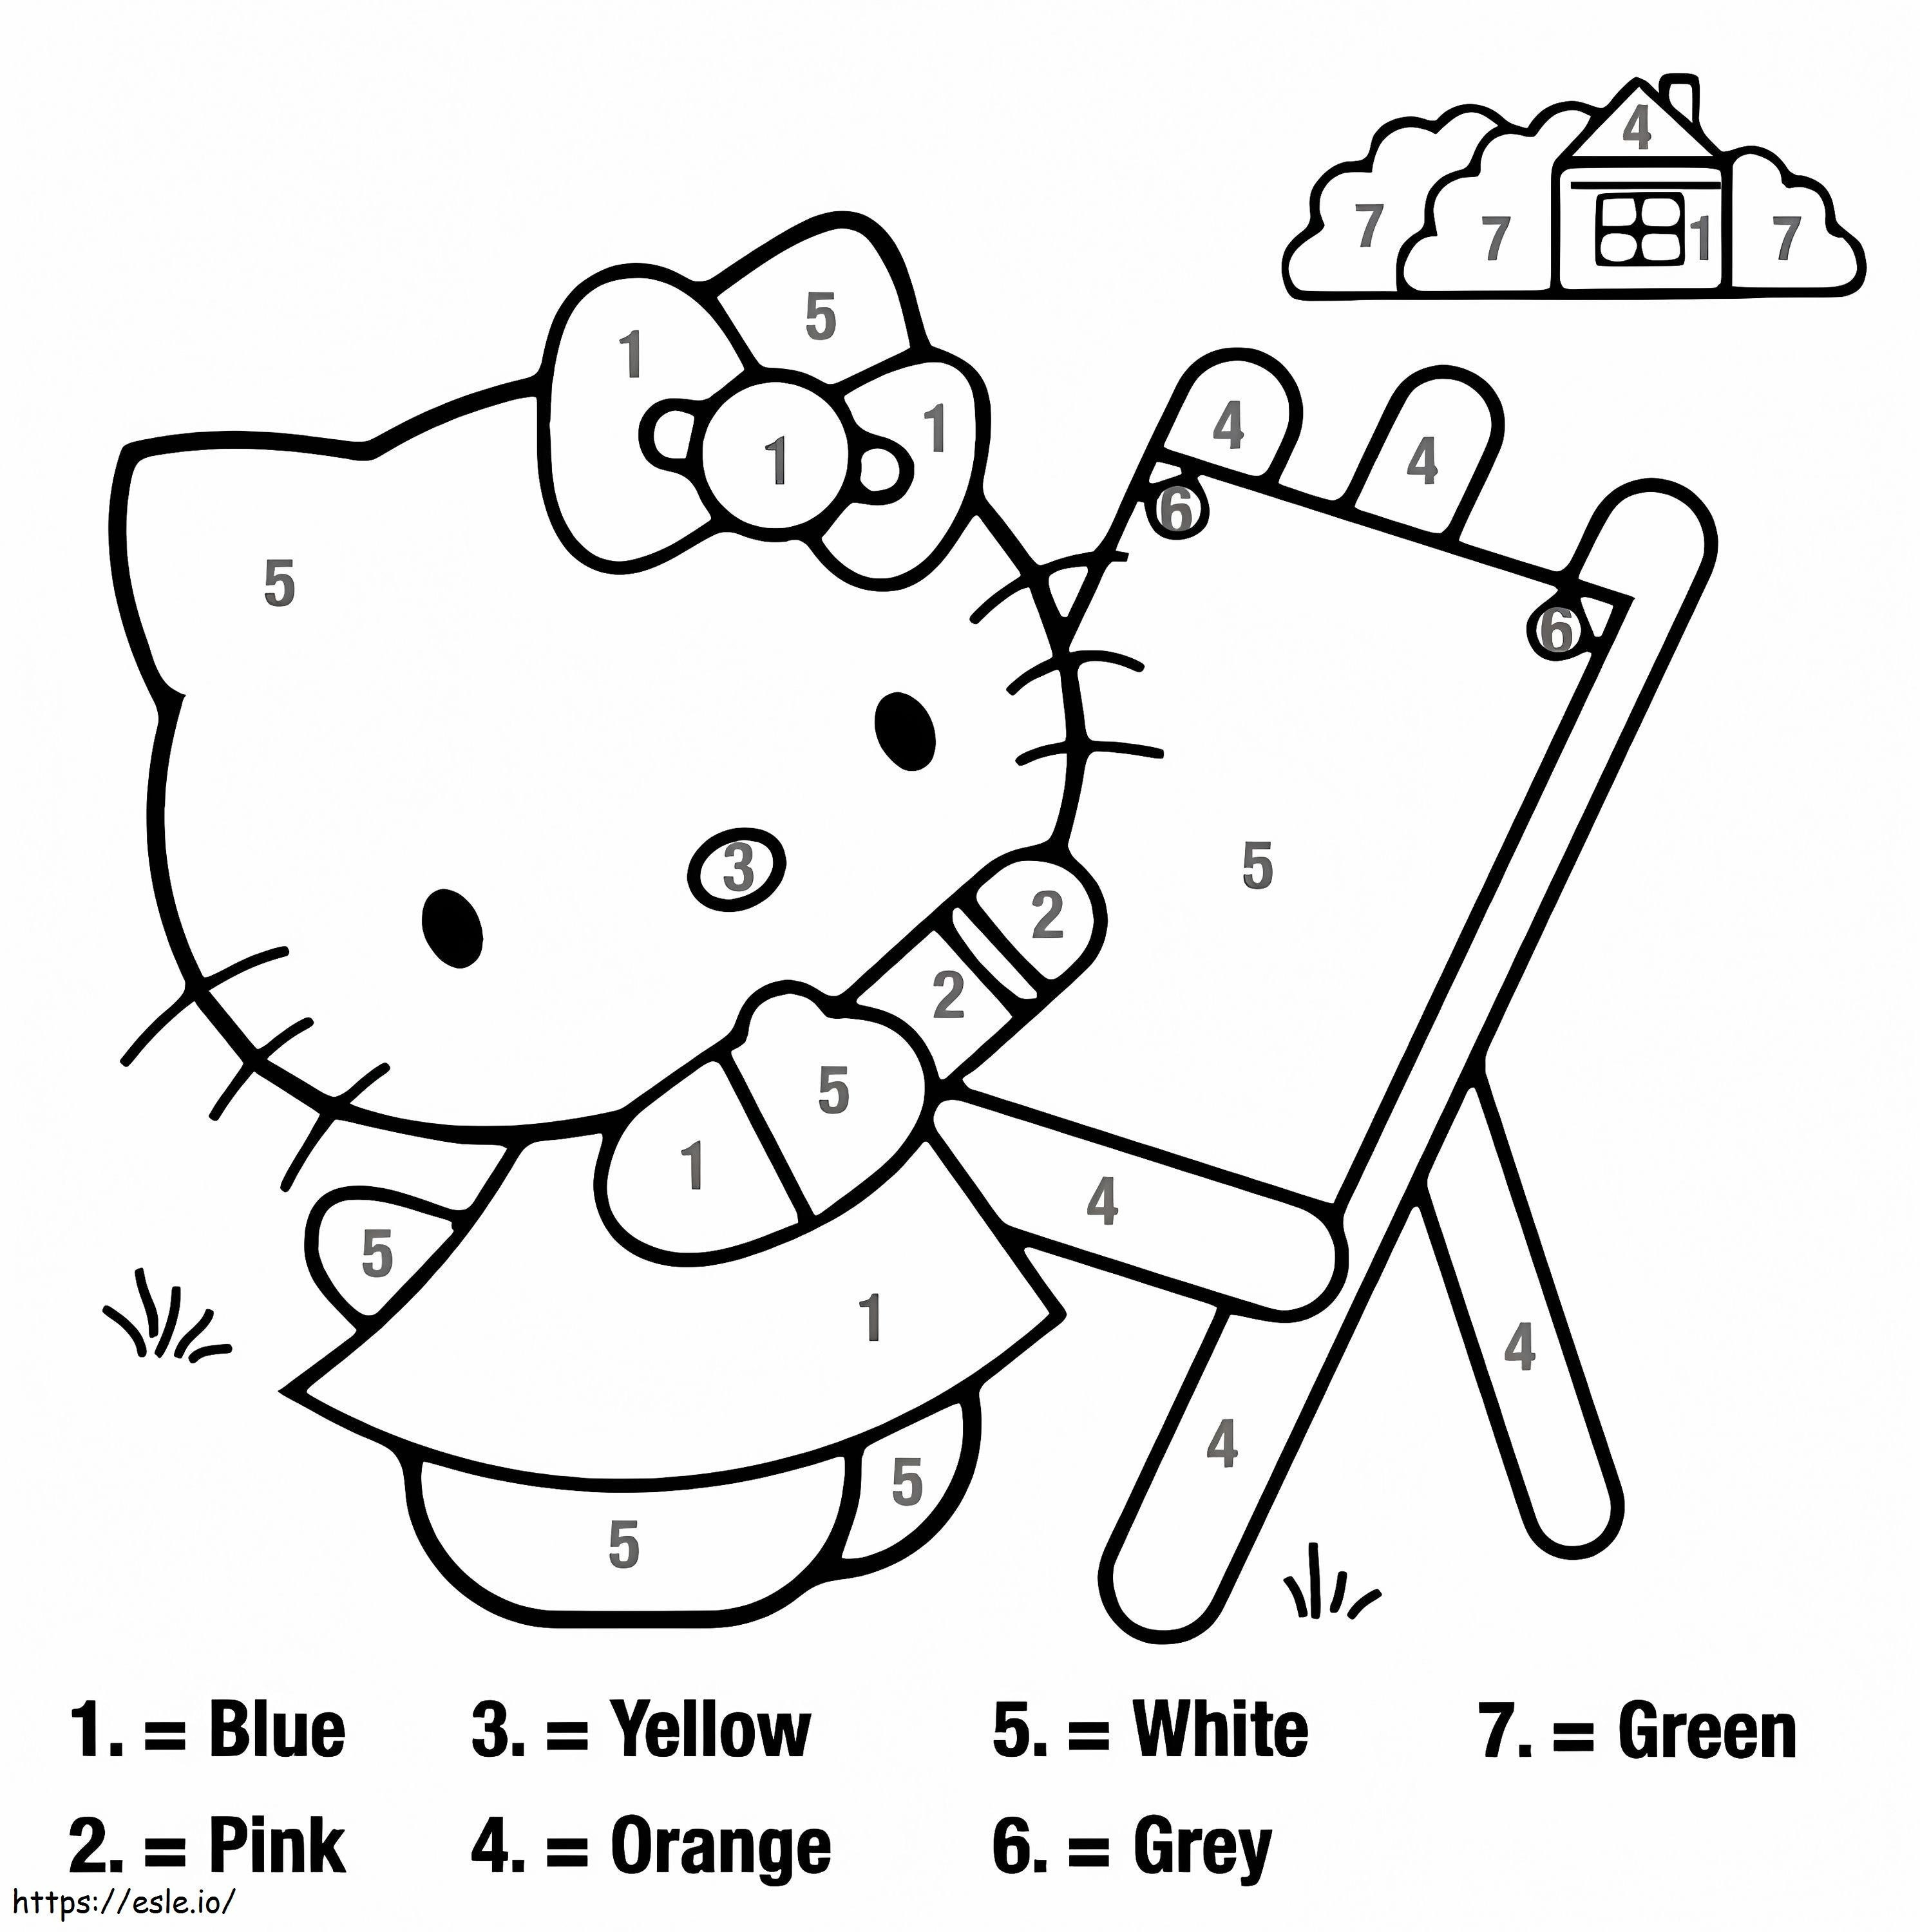 Lovely Hello Kitty Color By Number coloring page